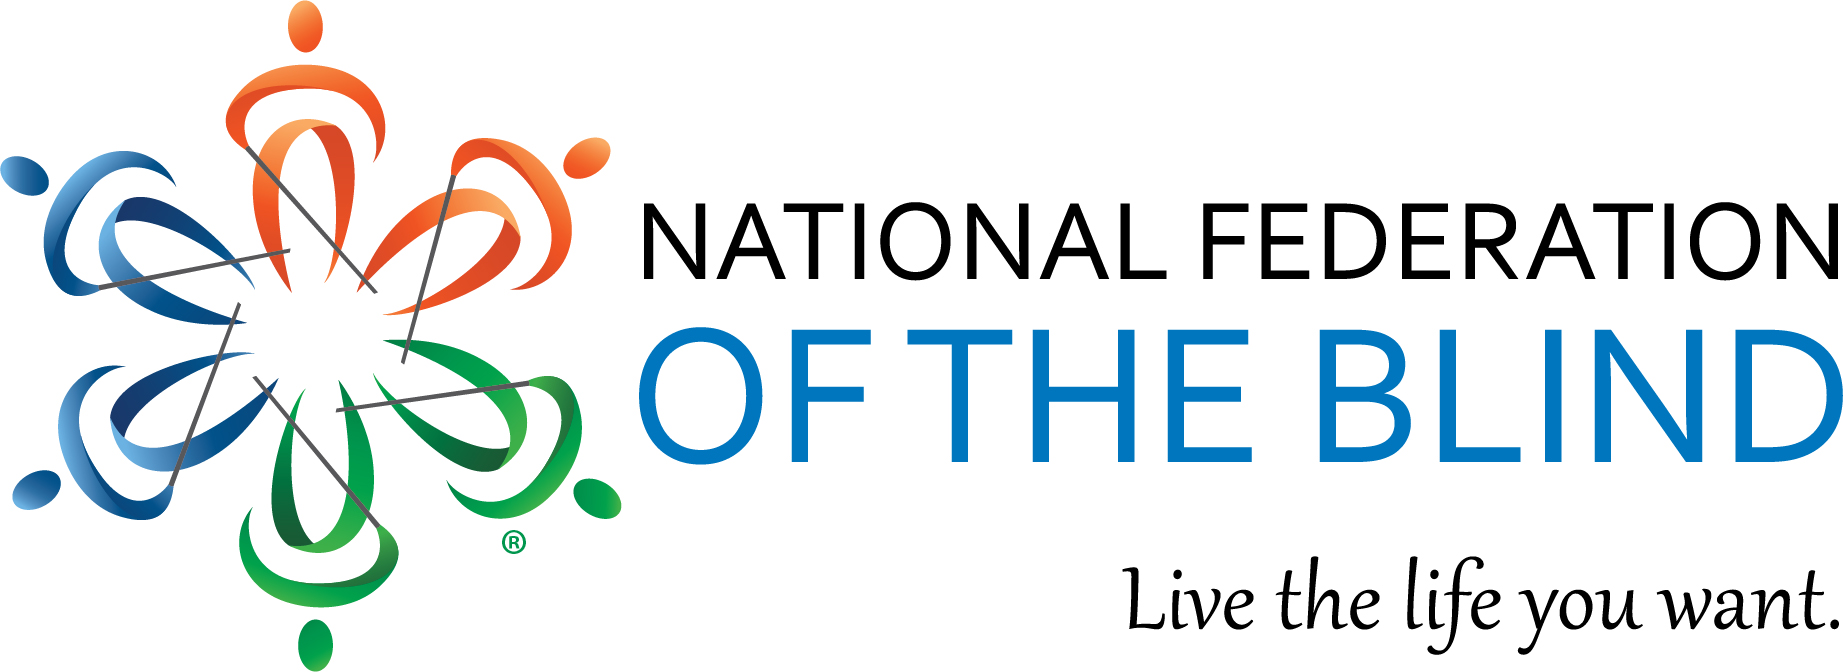 National Federation of the Blind logo with tagline, Live the life you want.